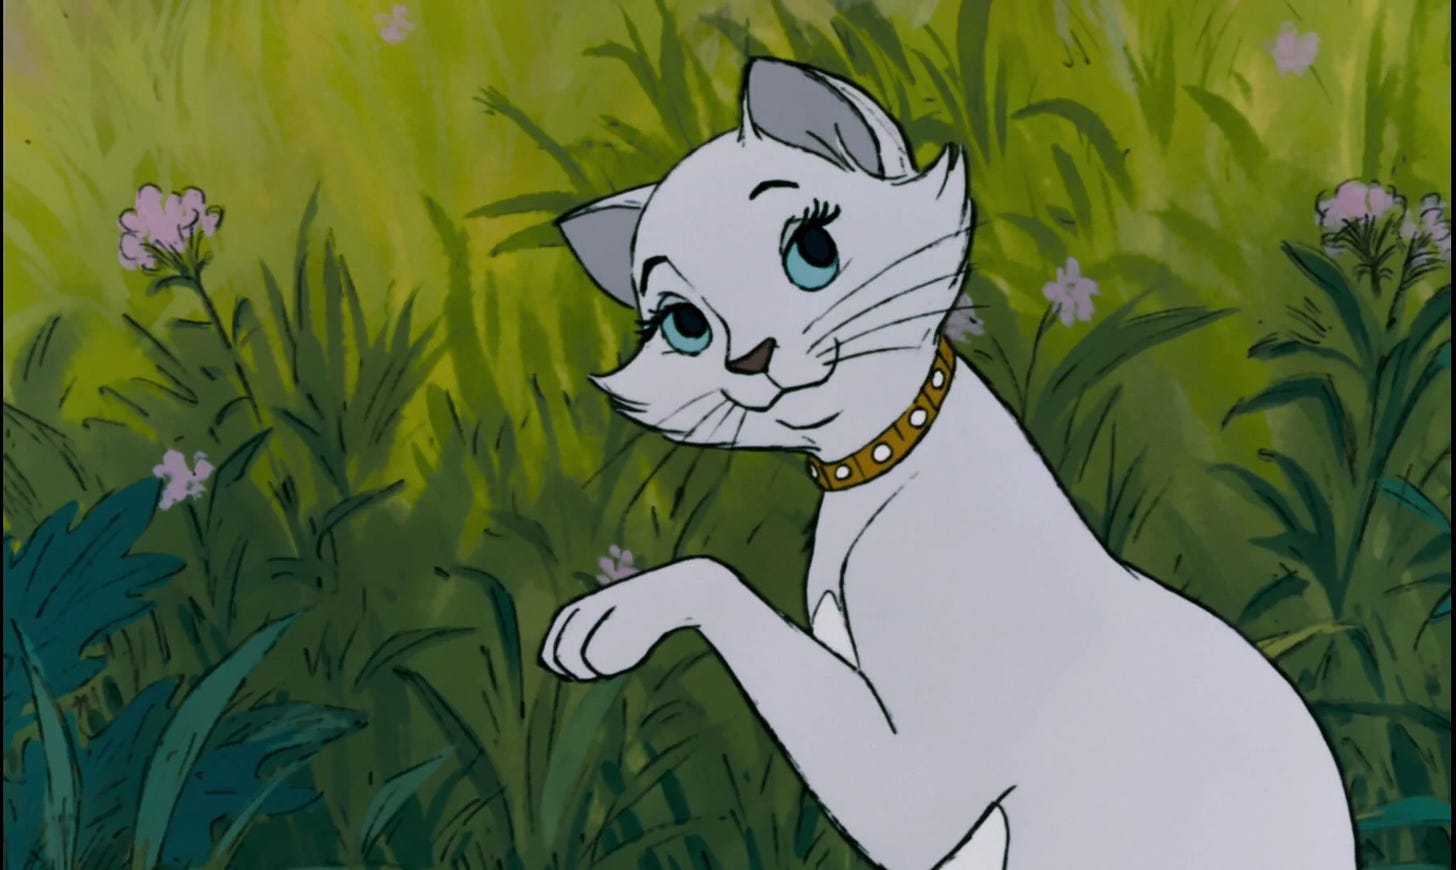 Duchess, the cat from Aristocats